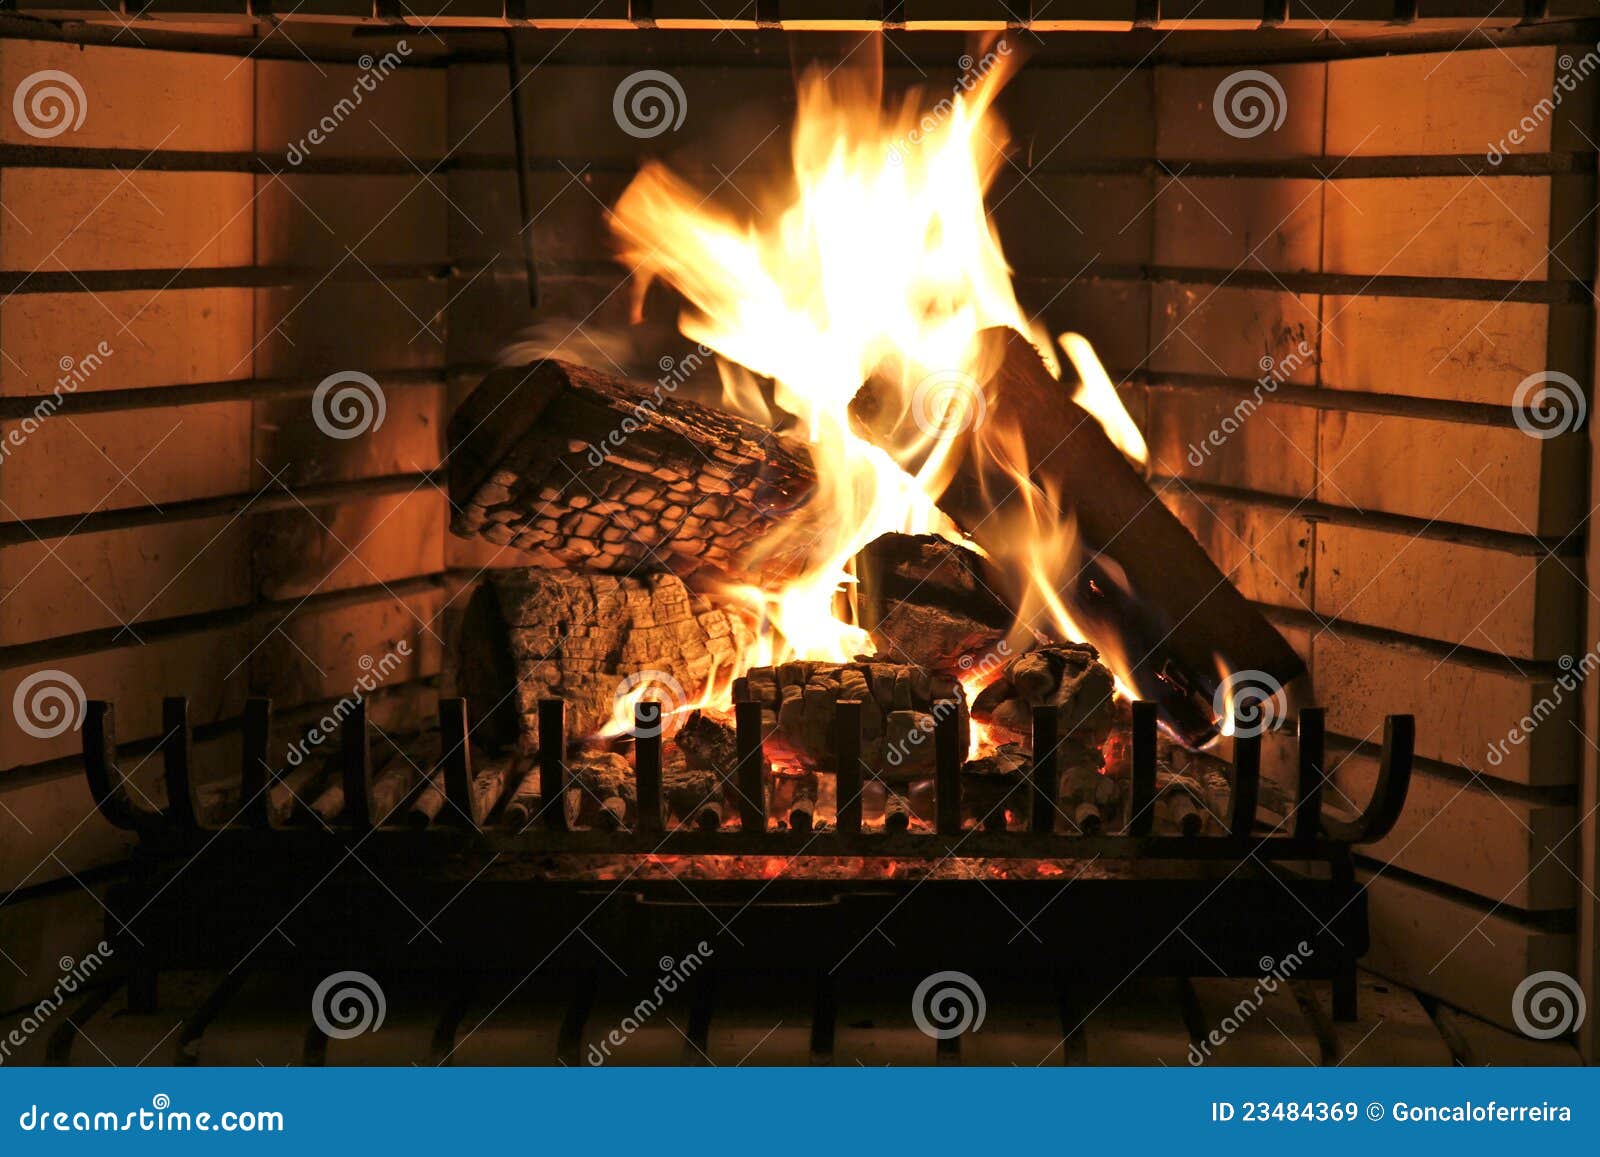 fire place